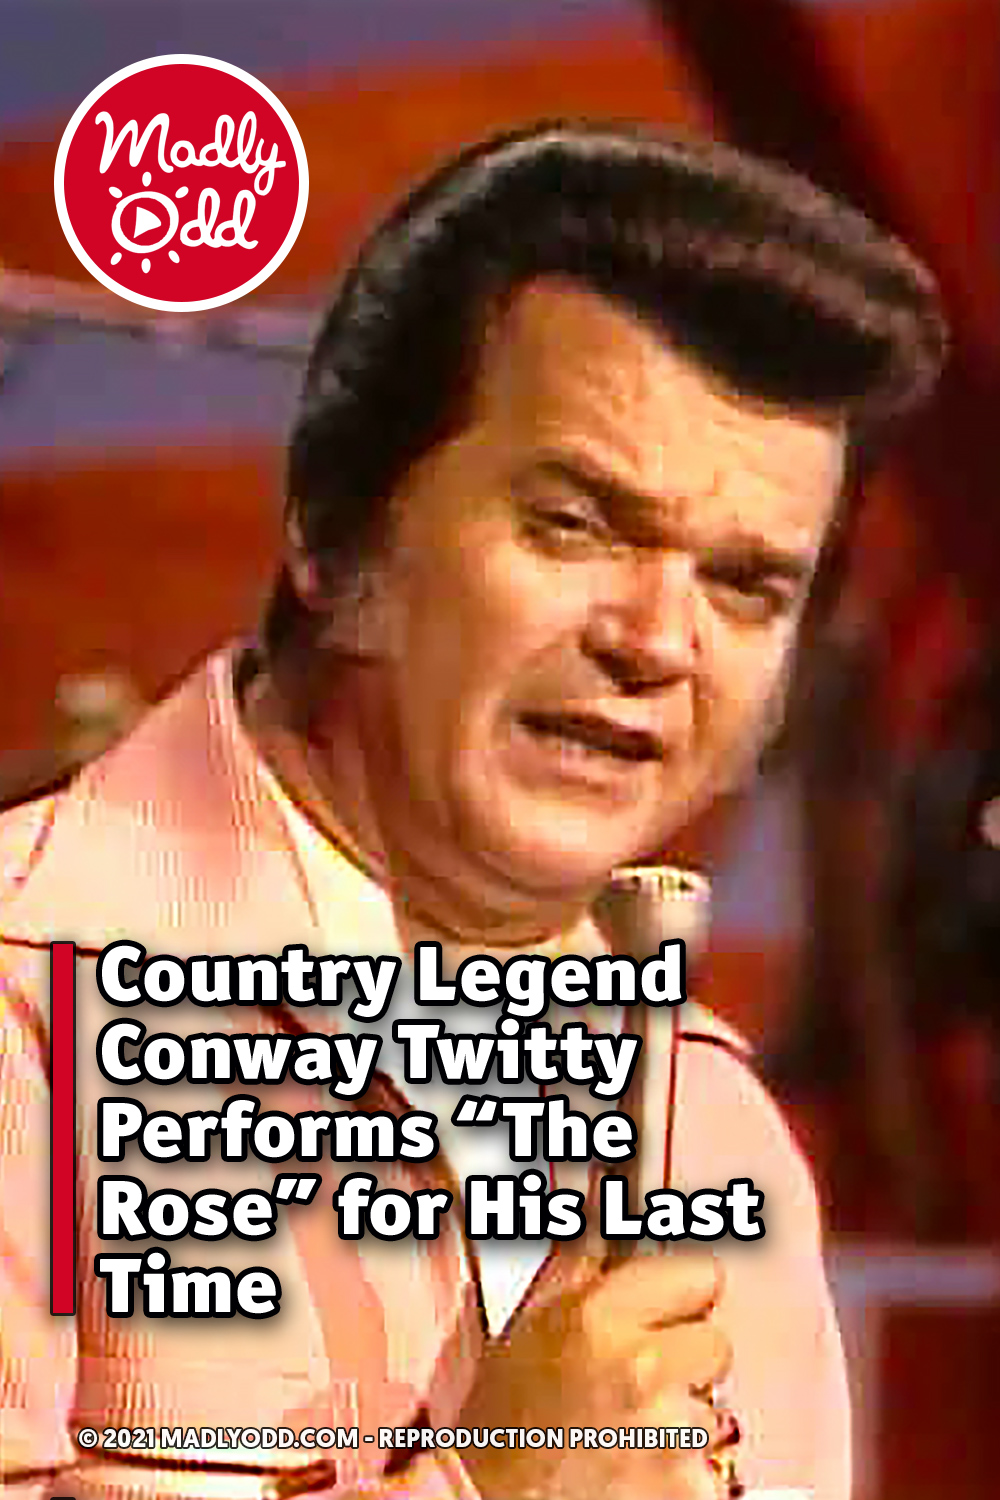 Country Legend Conway Twitty Performs “The Rose” for His Last Time